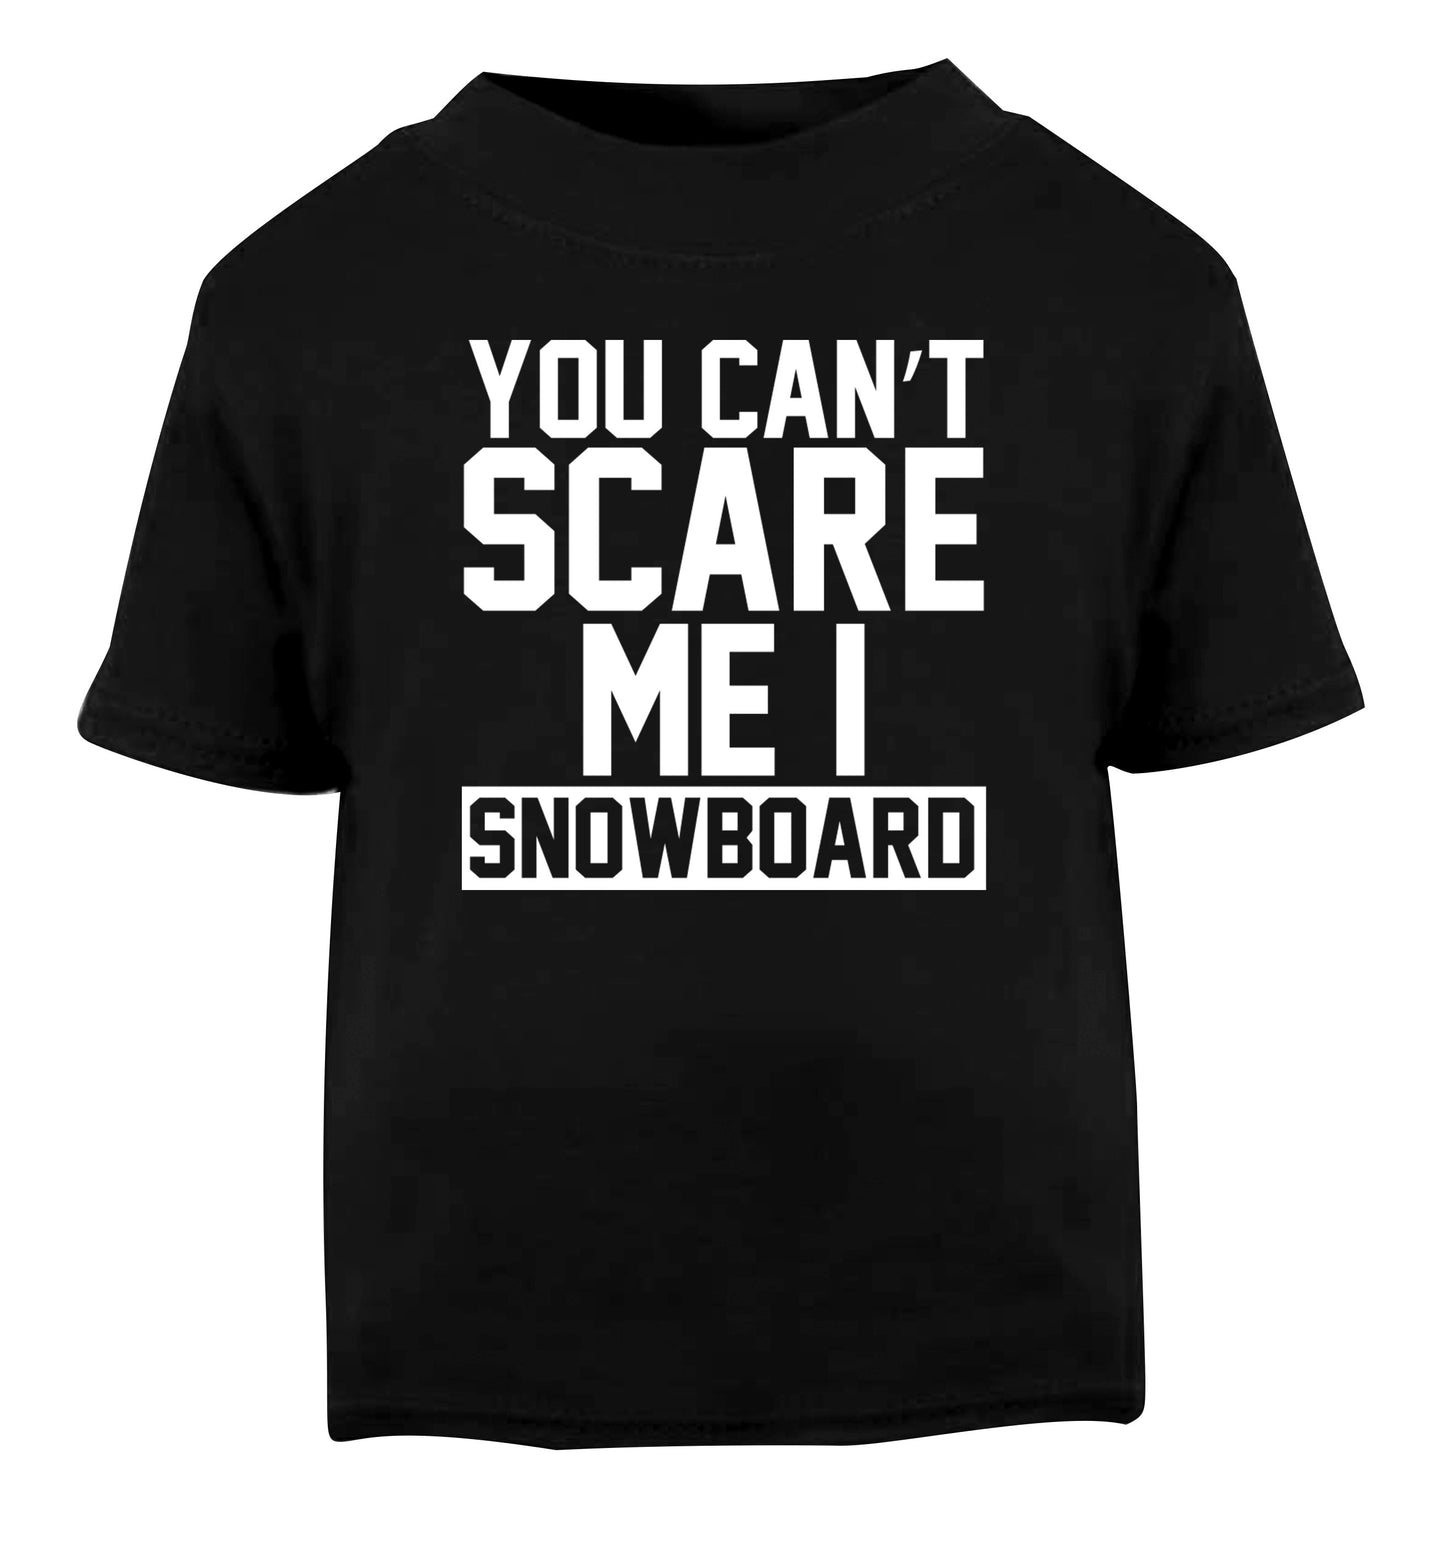 You can't scare me I snowboard Black Baby Toddler Tshirt 2 years